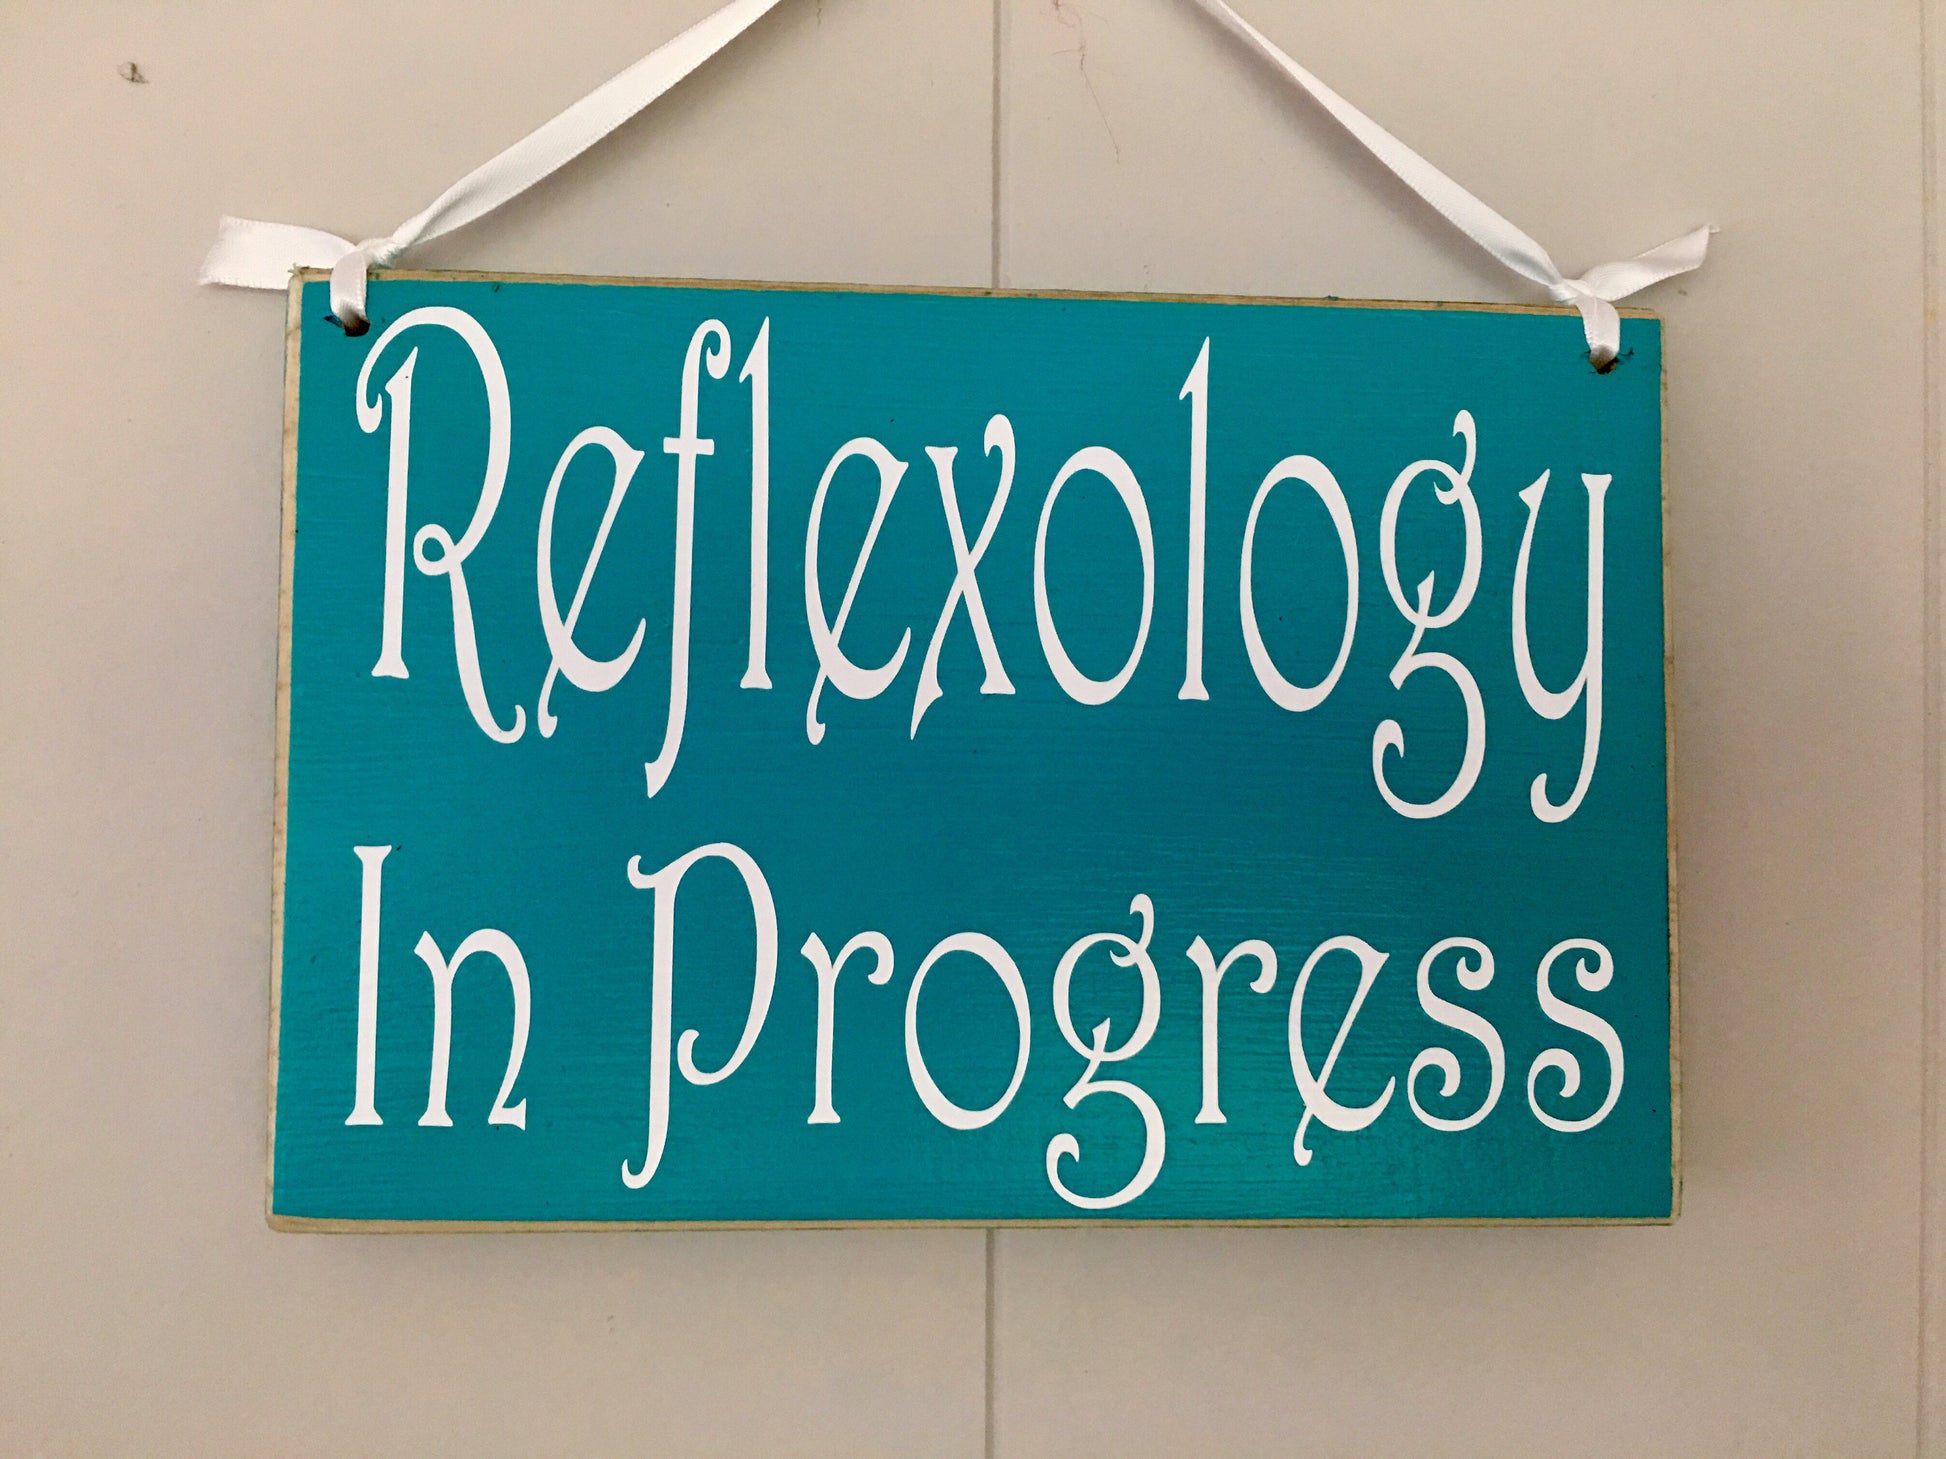 8x6 Reflexology In Progress Custom Wood Sign Session Please Do Not Disturb Spa Salon Relaxation Welcome Home Office Designs by Prim